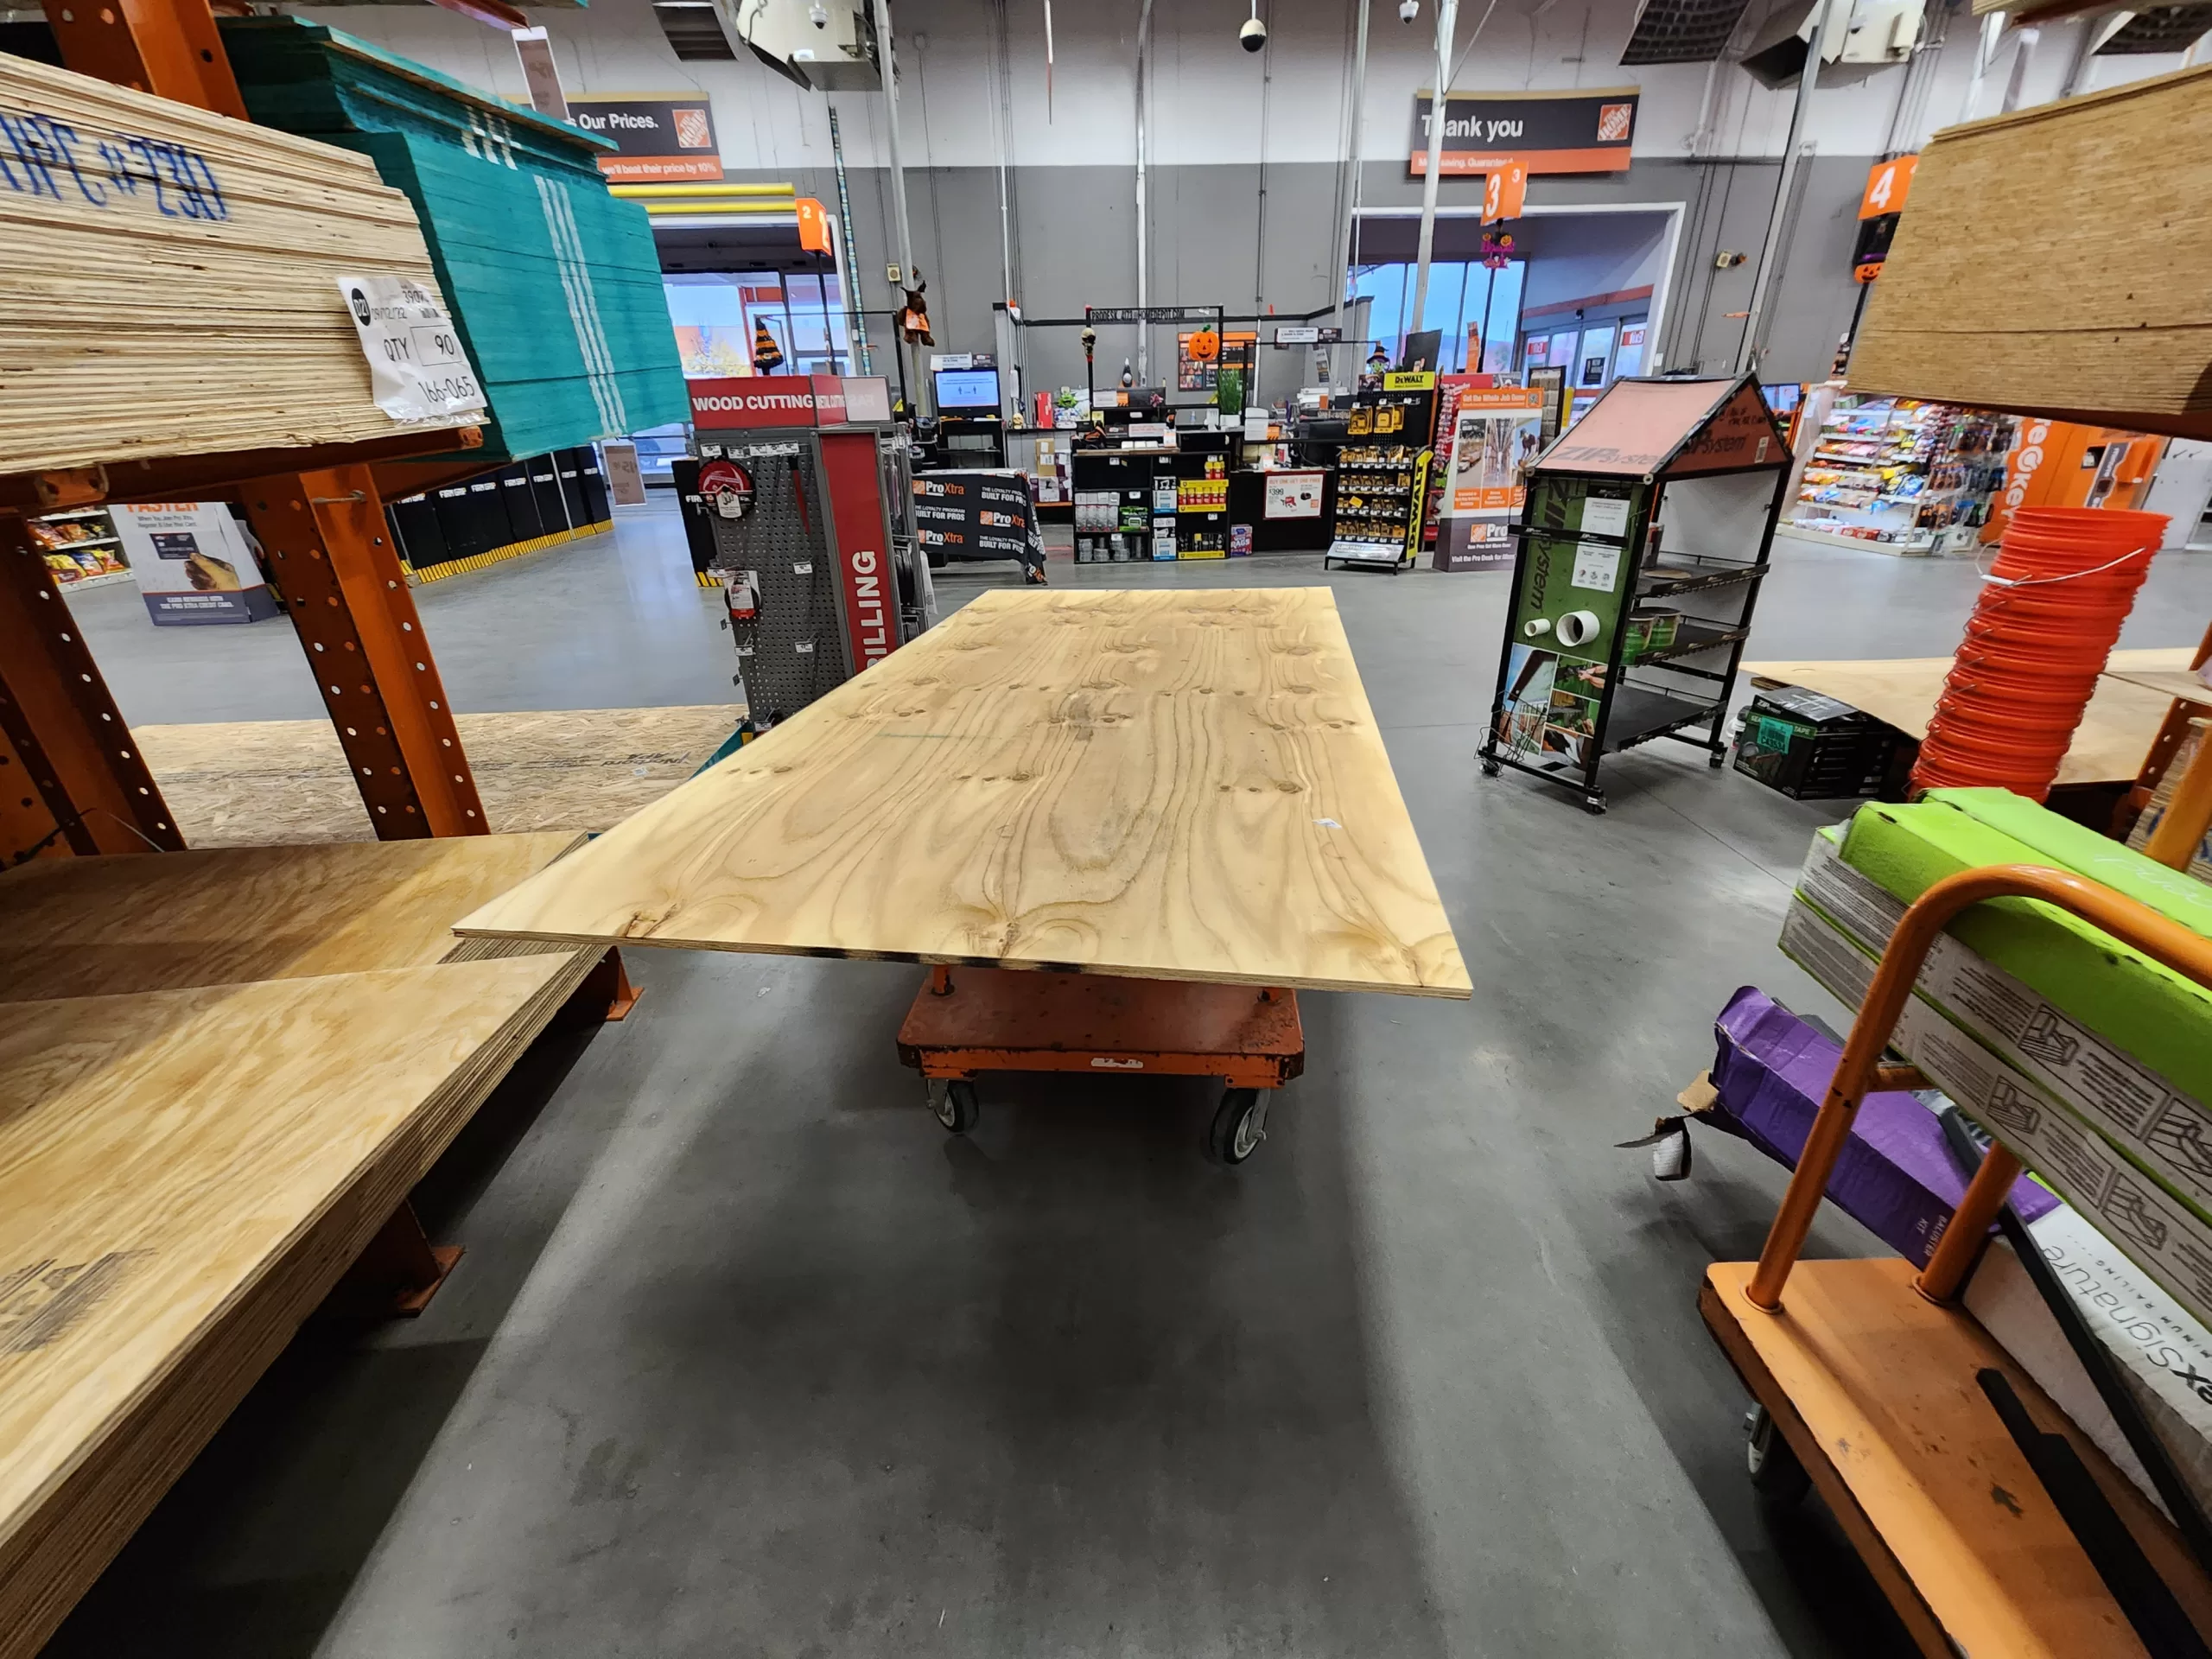 22/32 plywood in store, rough cut lumber on cart